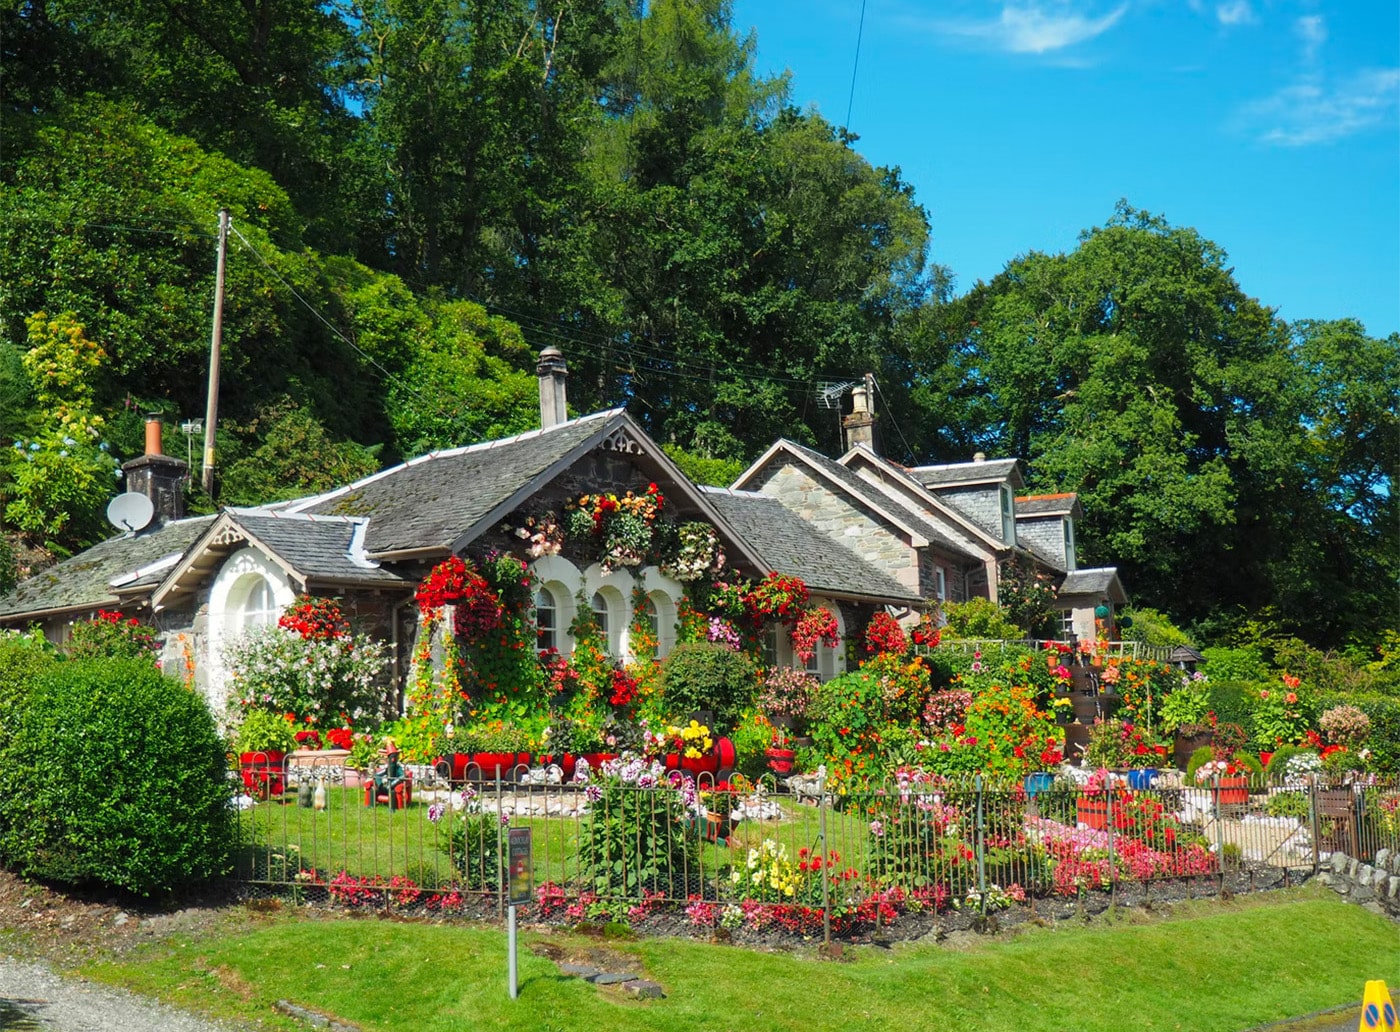 Cottage looking bug house with large garden full of flowers.